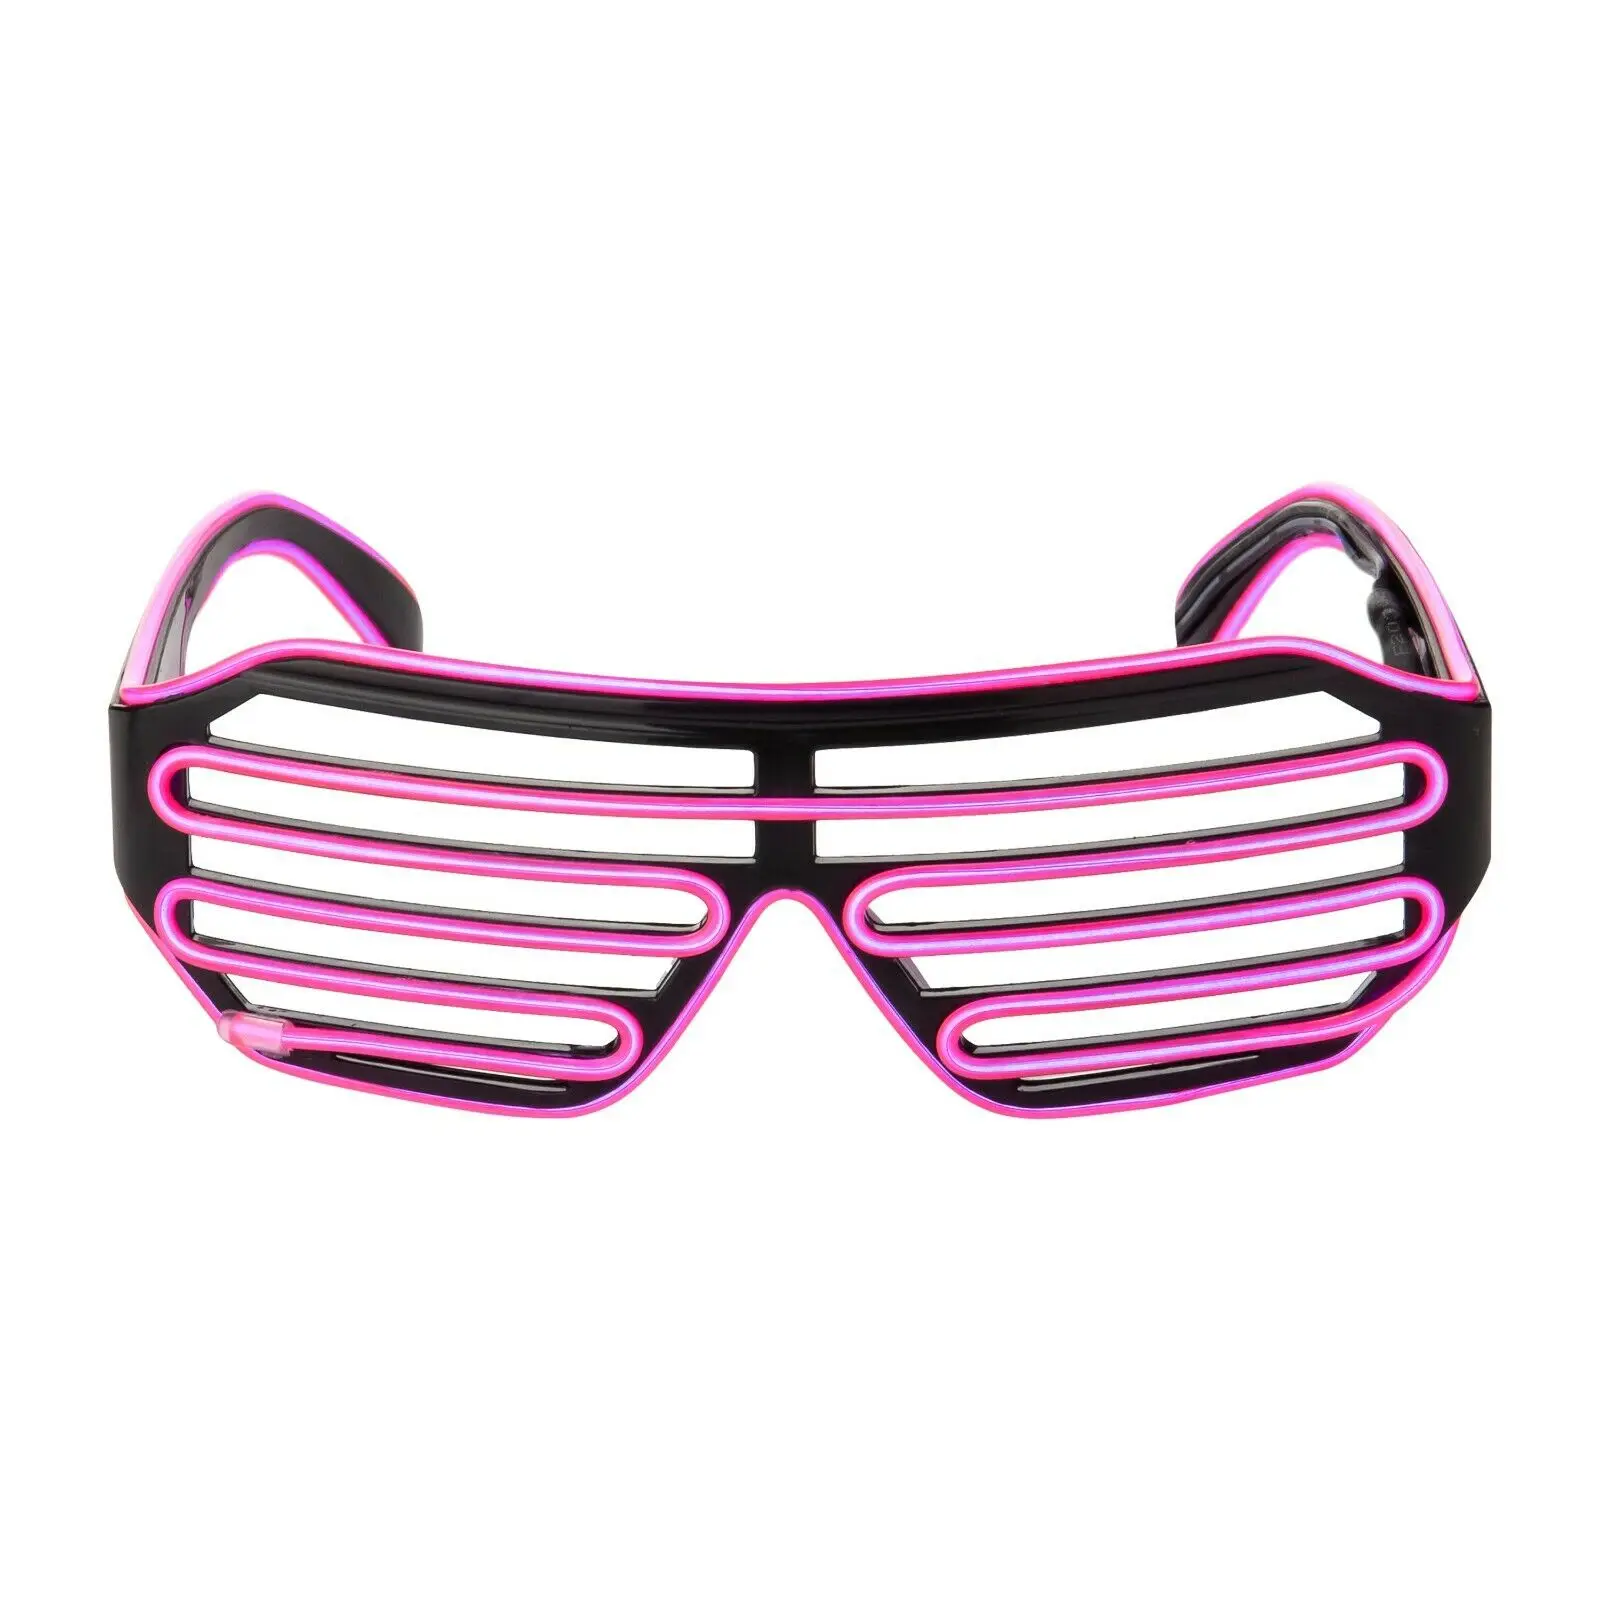 Shutter Shades Led Light Flashing Clubbing Bar Party Glasses Colorful Glory New 